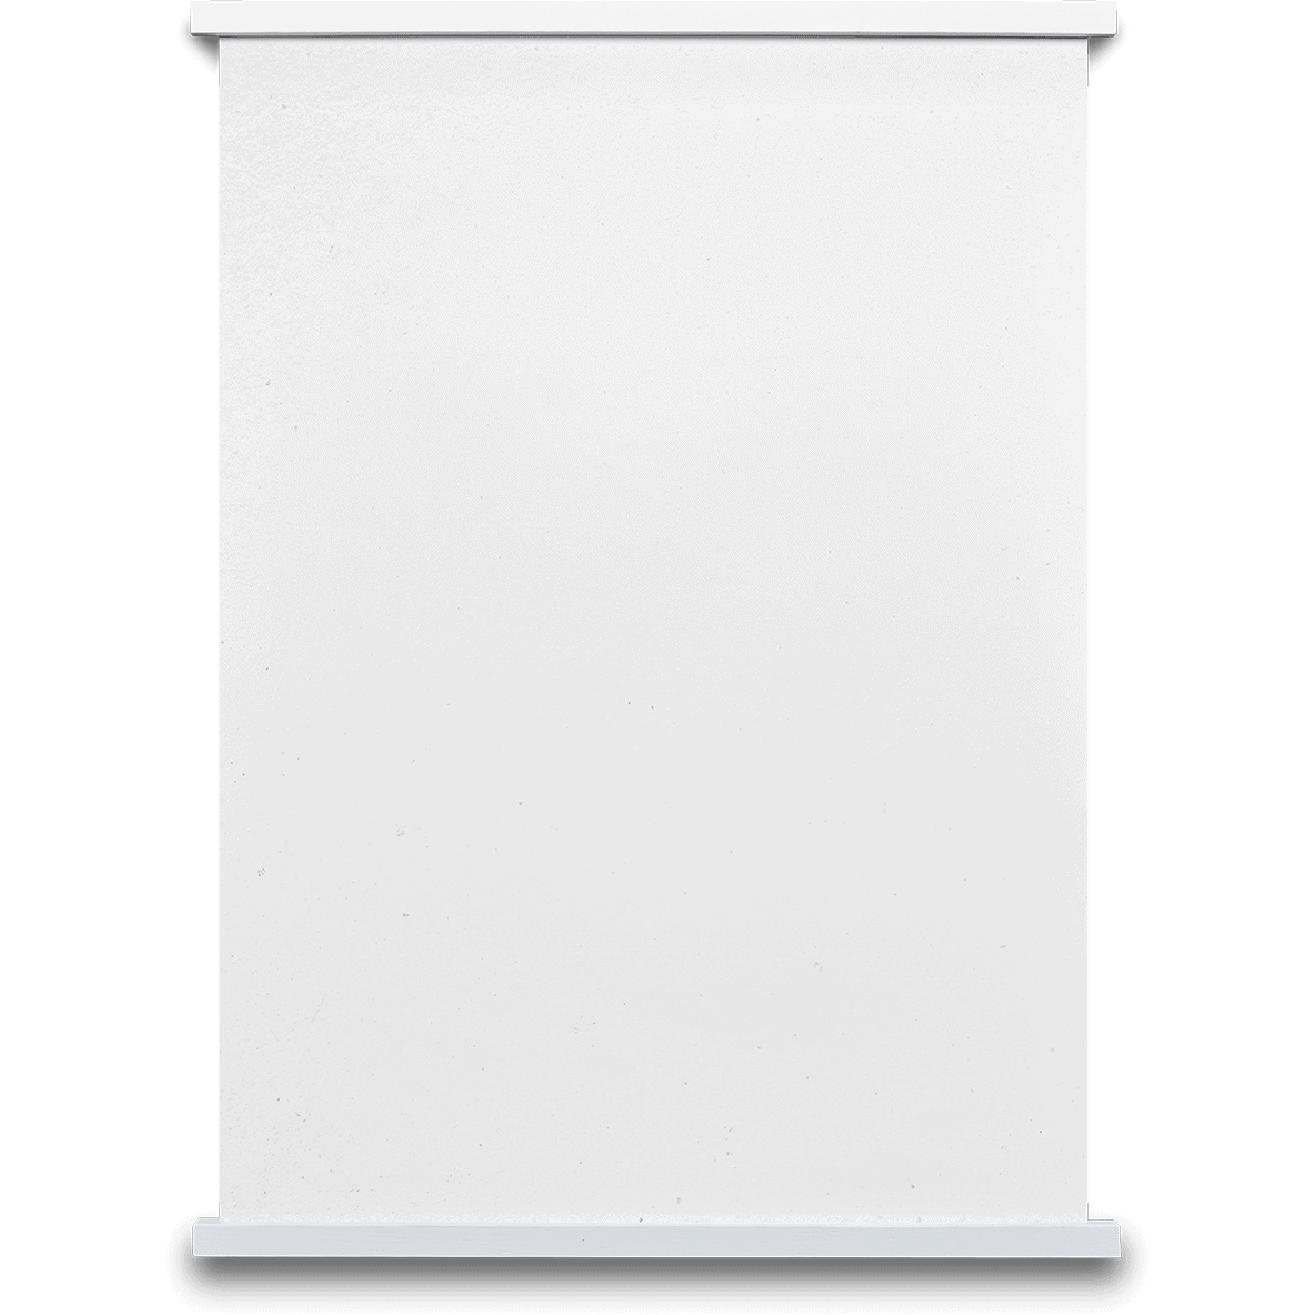 Paper Collective S TII CKS 53 Magnet Poster Bar, White